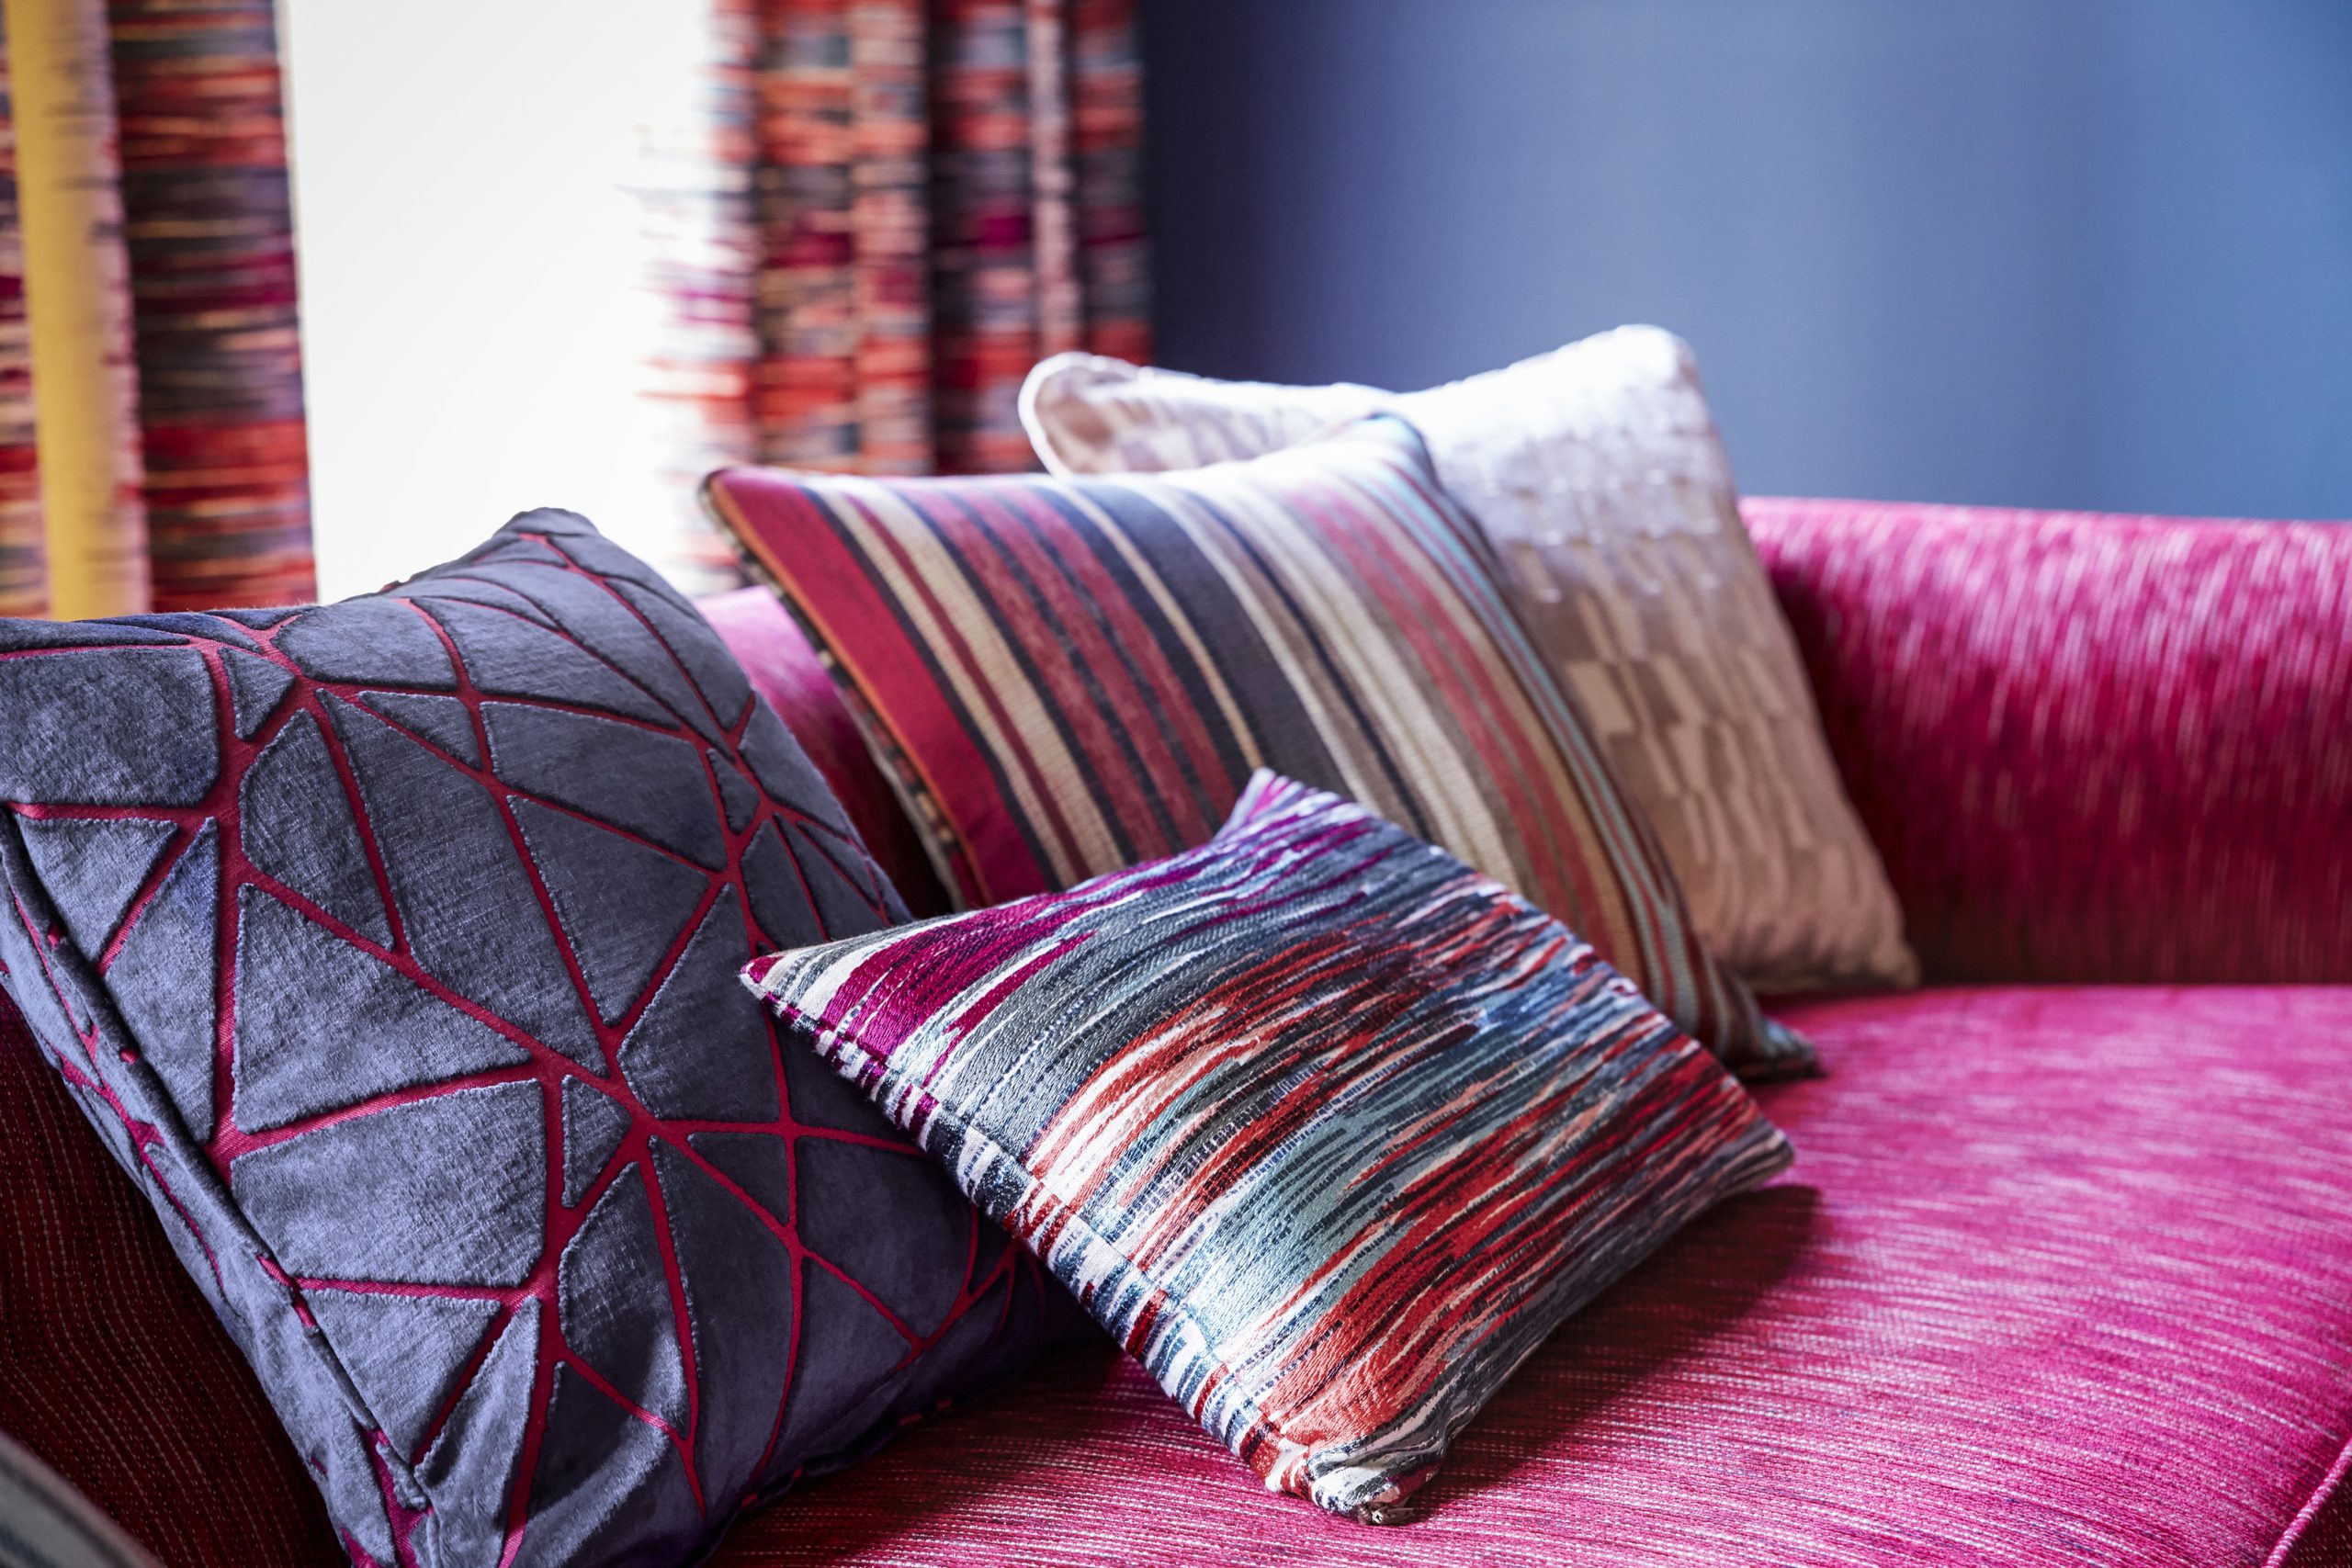 MOMENTUM 9 AND 10 BY HARLEQUIN | Malcolm Fabrics NZ